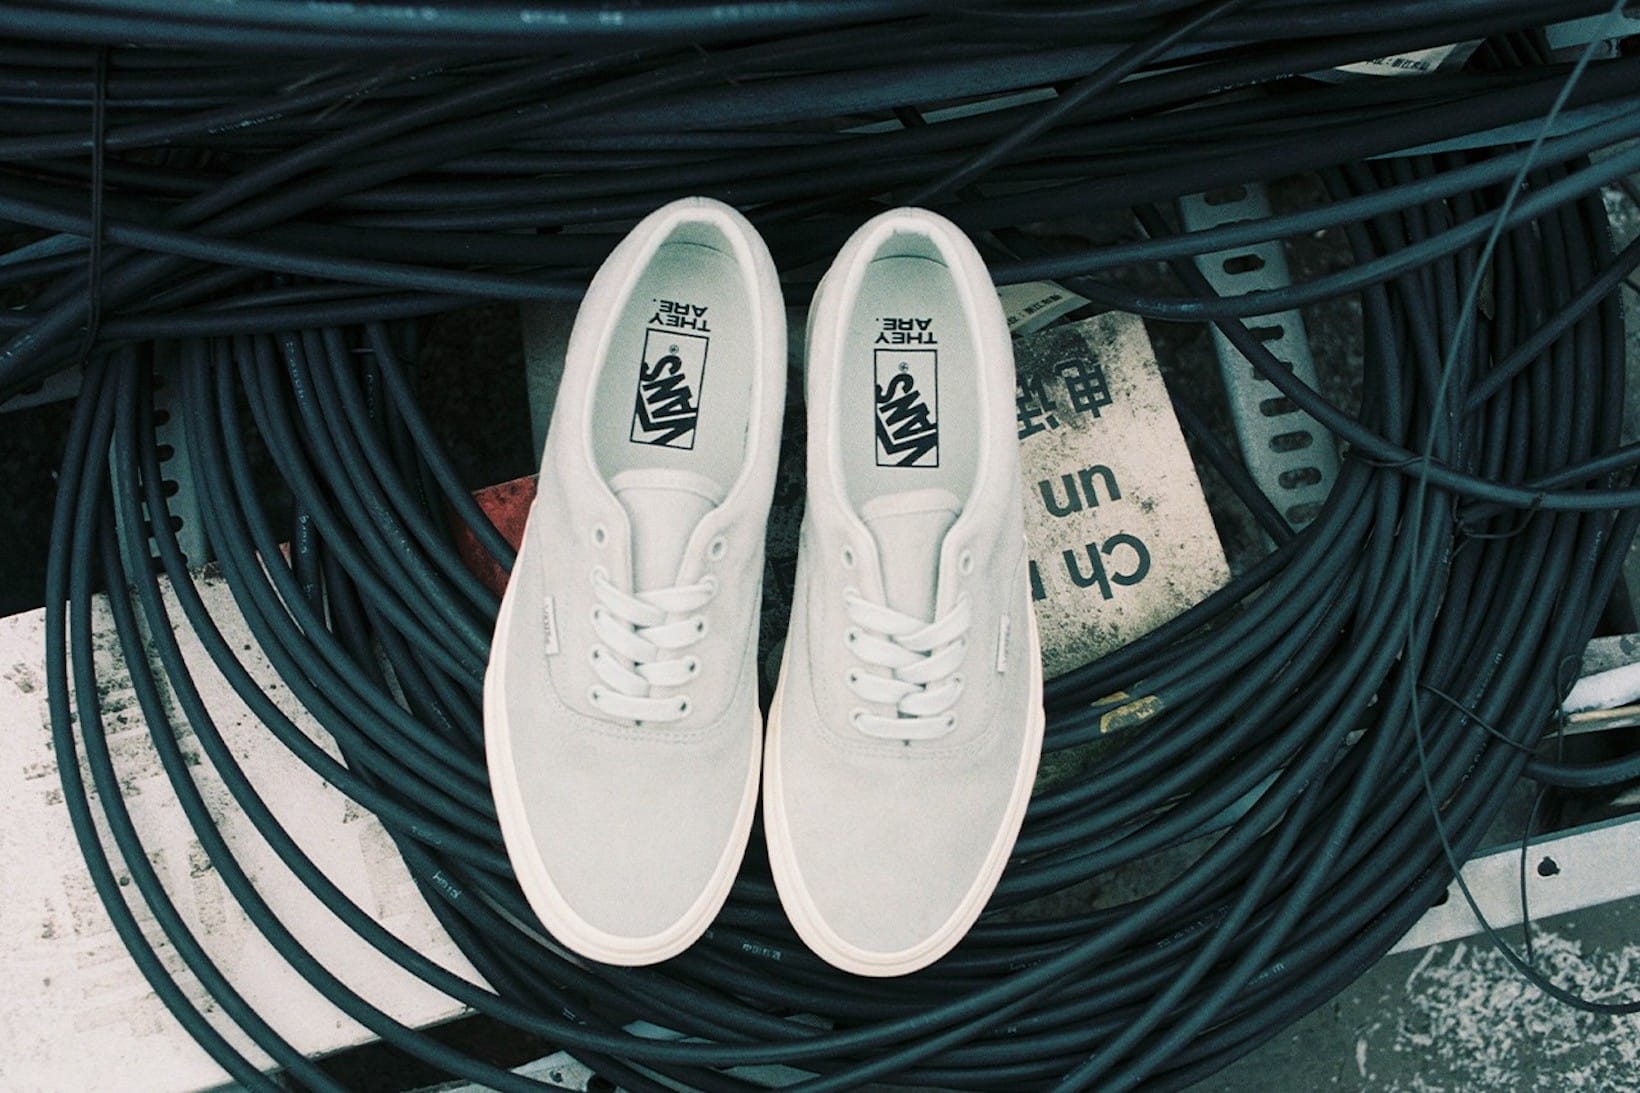 Suwukou x Vans Year of the Ox Collab 